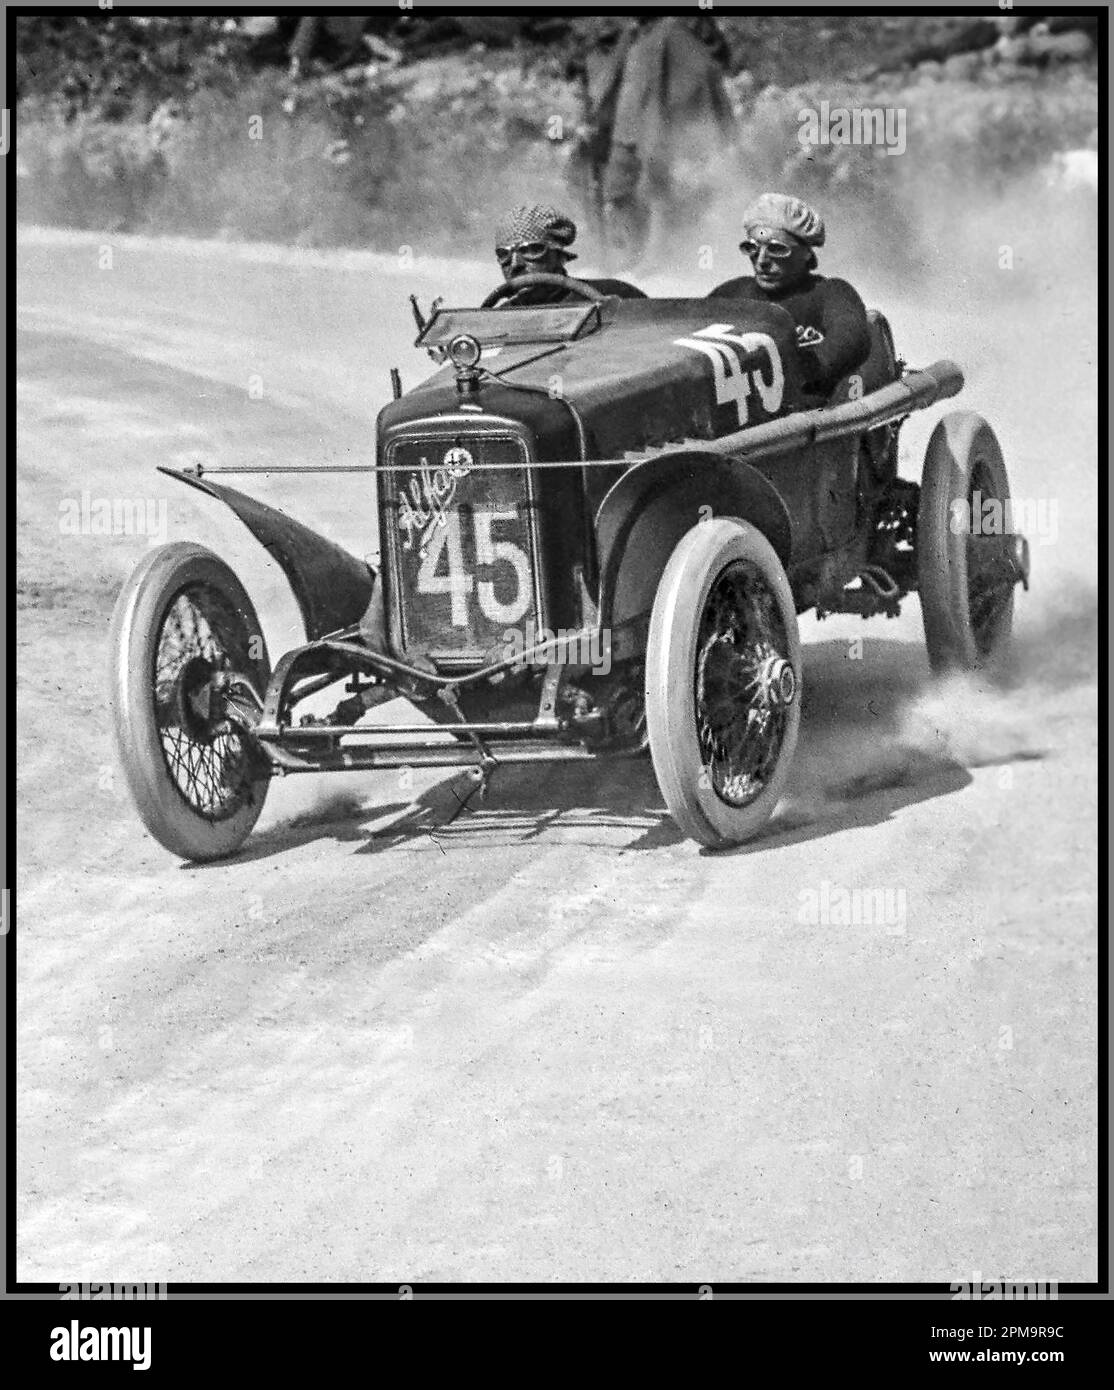 1922 Targa Florio Motor Race with Giuseppe Campari in Alfa Romeo 40-60 car number 45. The ALFA 40/60 HP is a road car and race car made by Italian car manufacturer ALFA (later to become Alfa Romeo). This model was made between 1913 and 1922 and was designed by Giuseppe Merosi, as were all other Alfas at that time. The 40/60 HP has a 6082 cc straight-four engine with overhead valves, which produced 70 PS (51 kW) and its top speed was 125 km/h (78 mph) Stock Photo